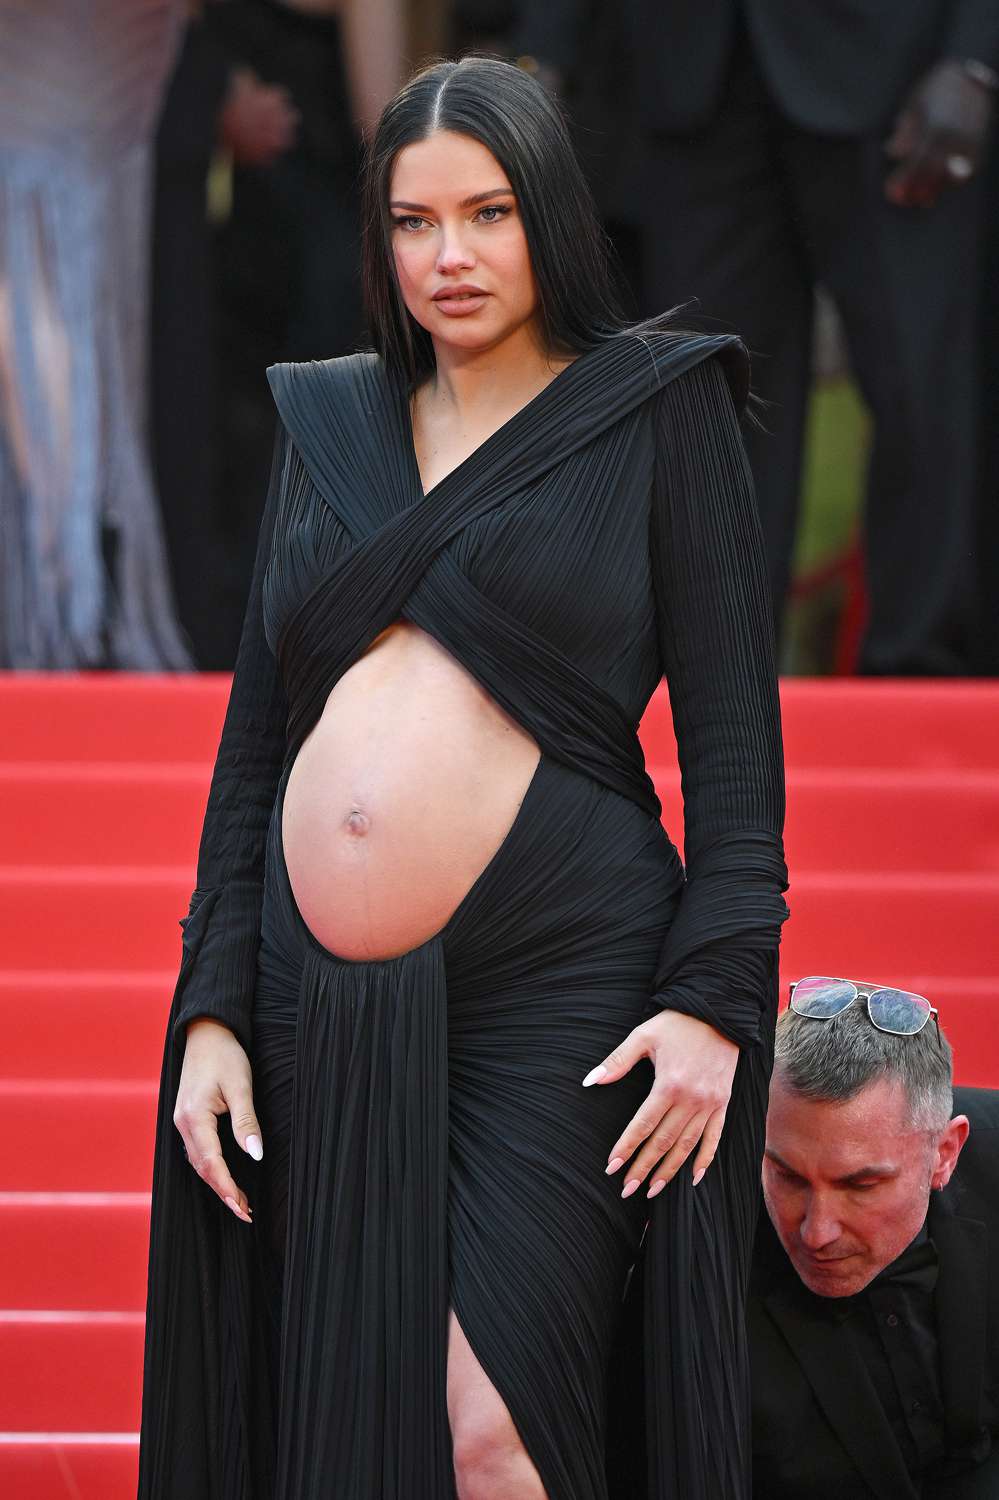 Pregnant Adriana Lima Shows Off Bare Bump in Cut Out Dress at Cannes |  PEOPLE.com